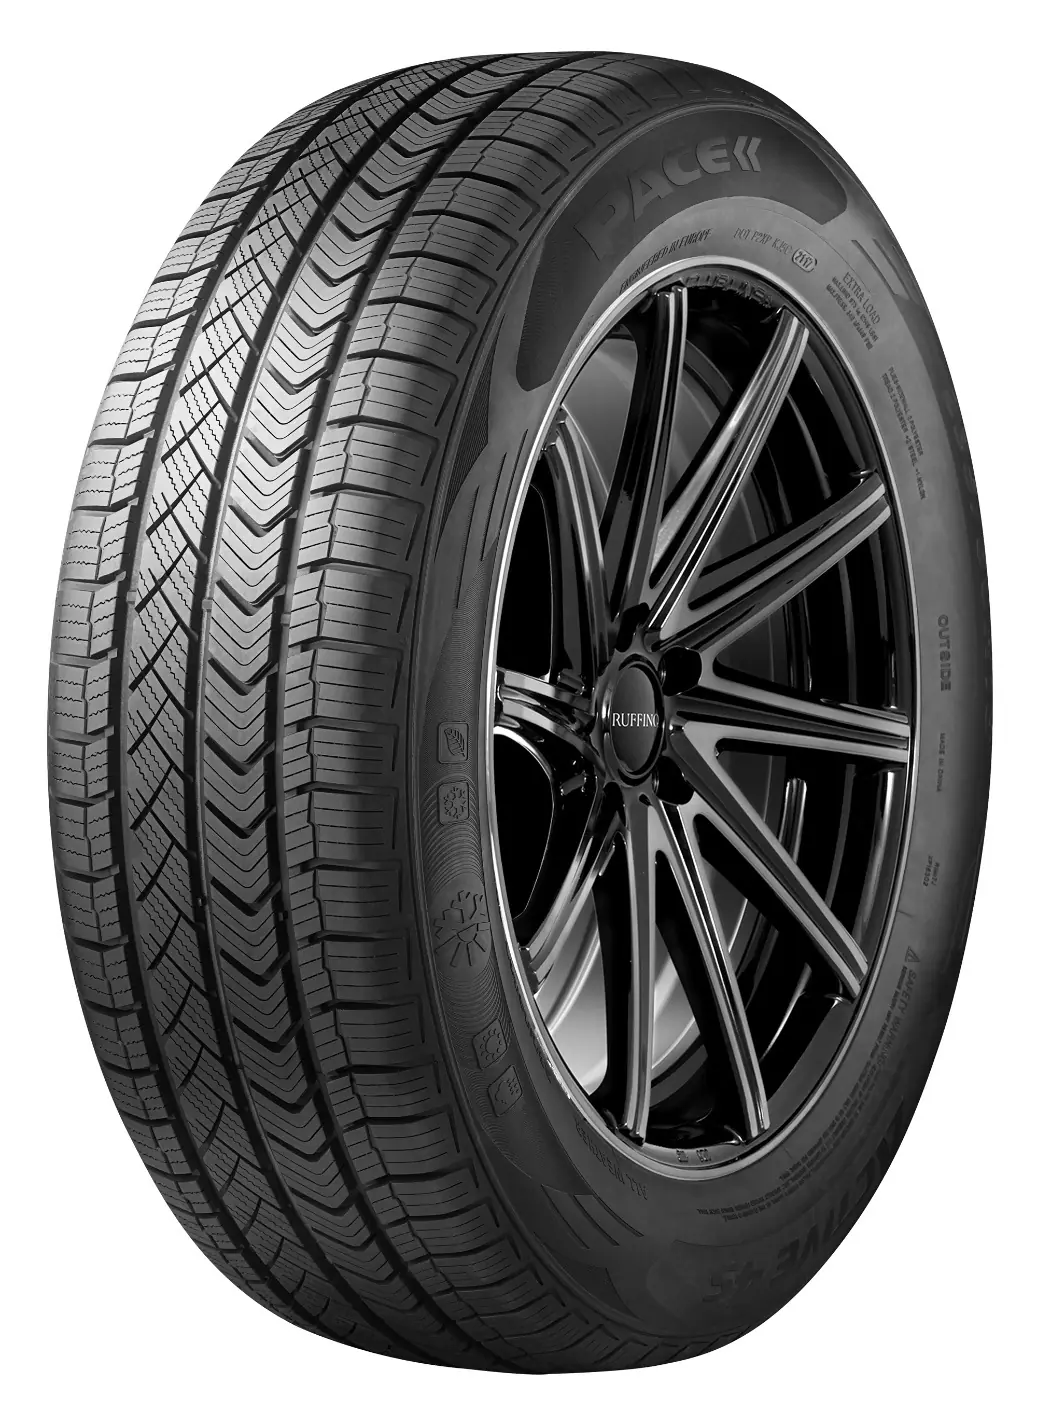 Pace Pace 175/70 R14 88T ACTIVE 4S XL pneumatici nuovi All Season 